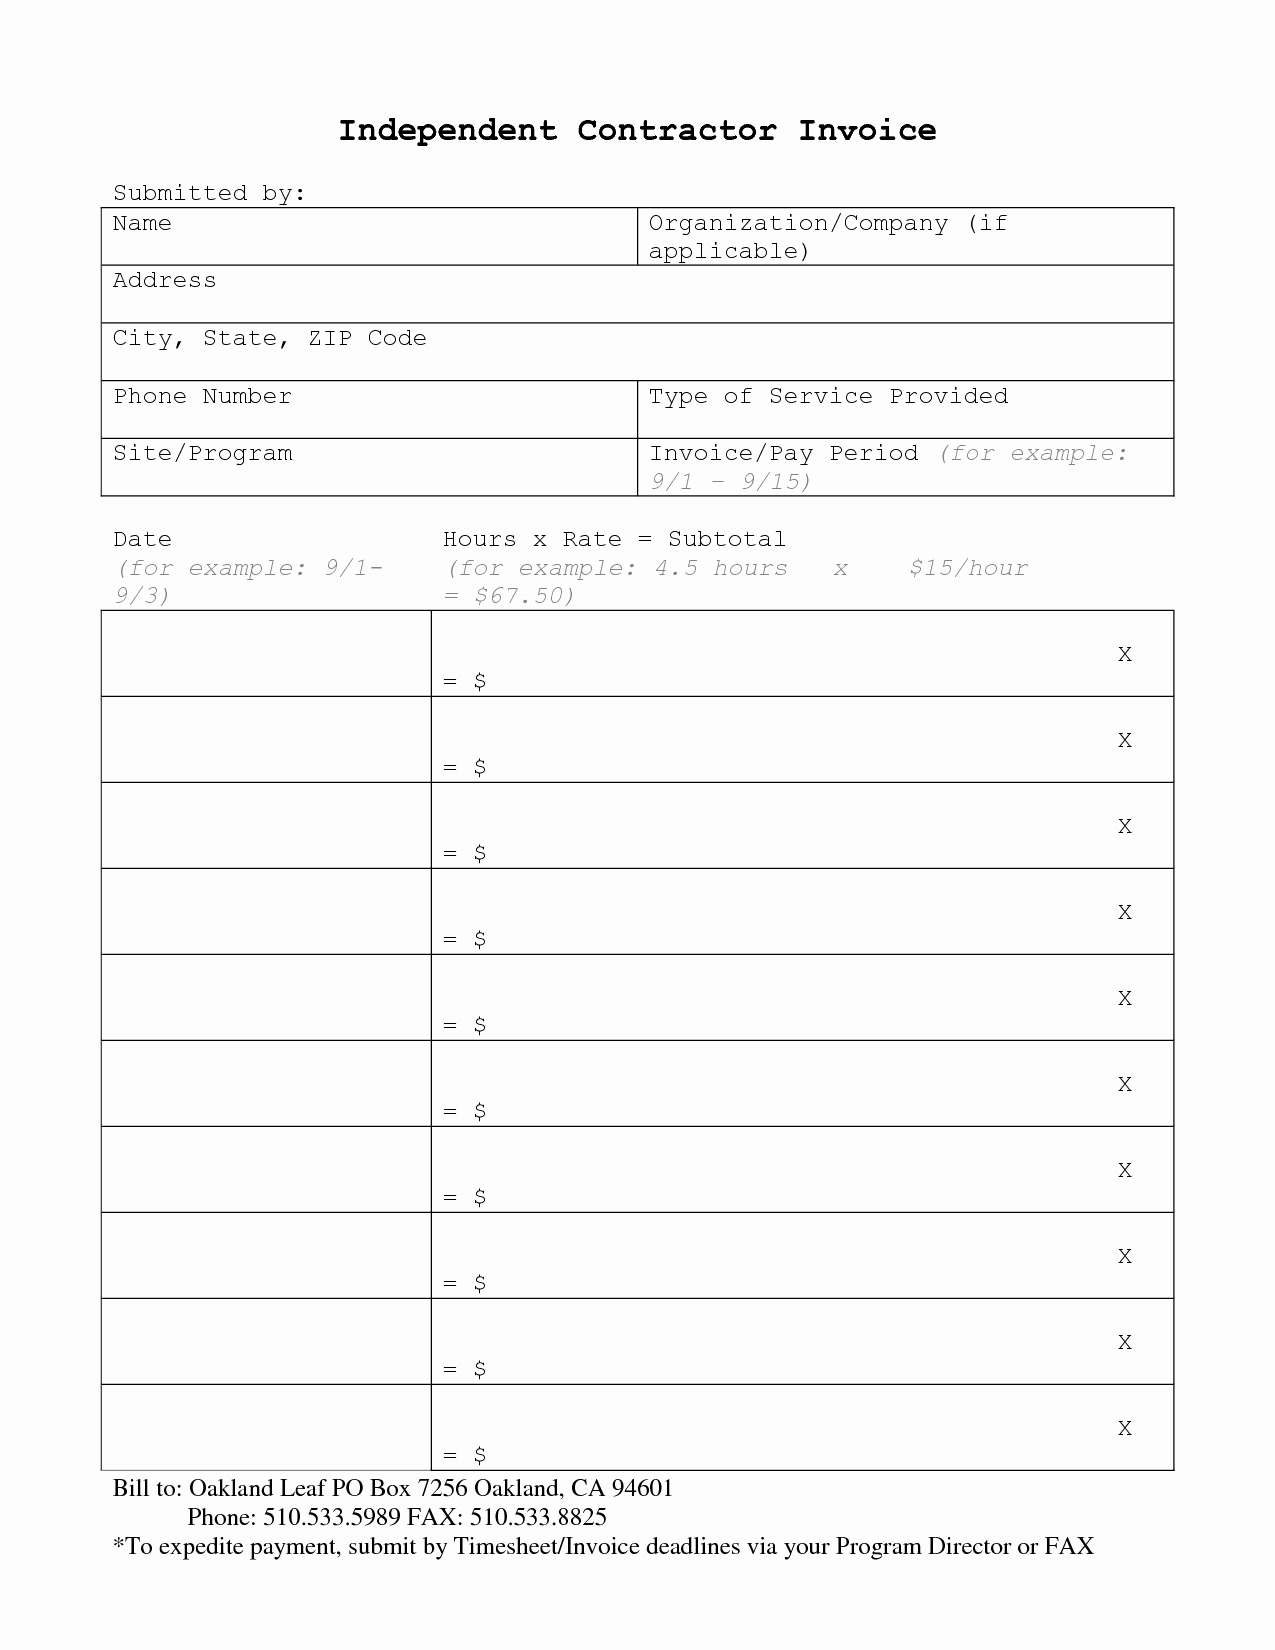 Independent Consultant Invoice Template Elegant Independent Contractor Invoice Template